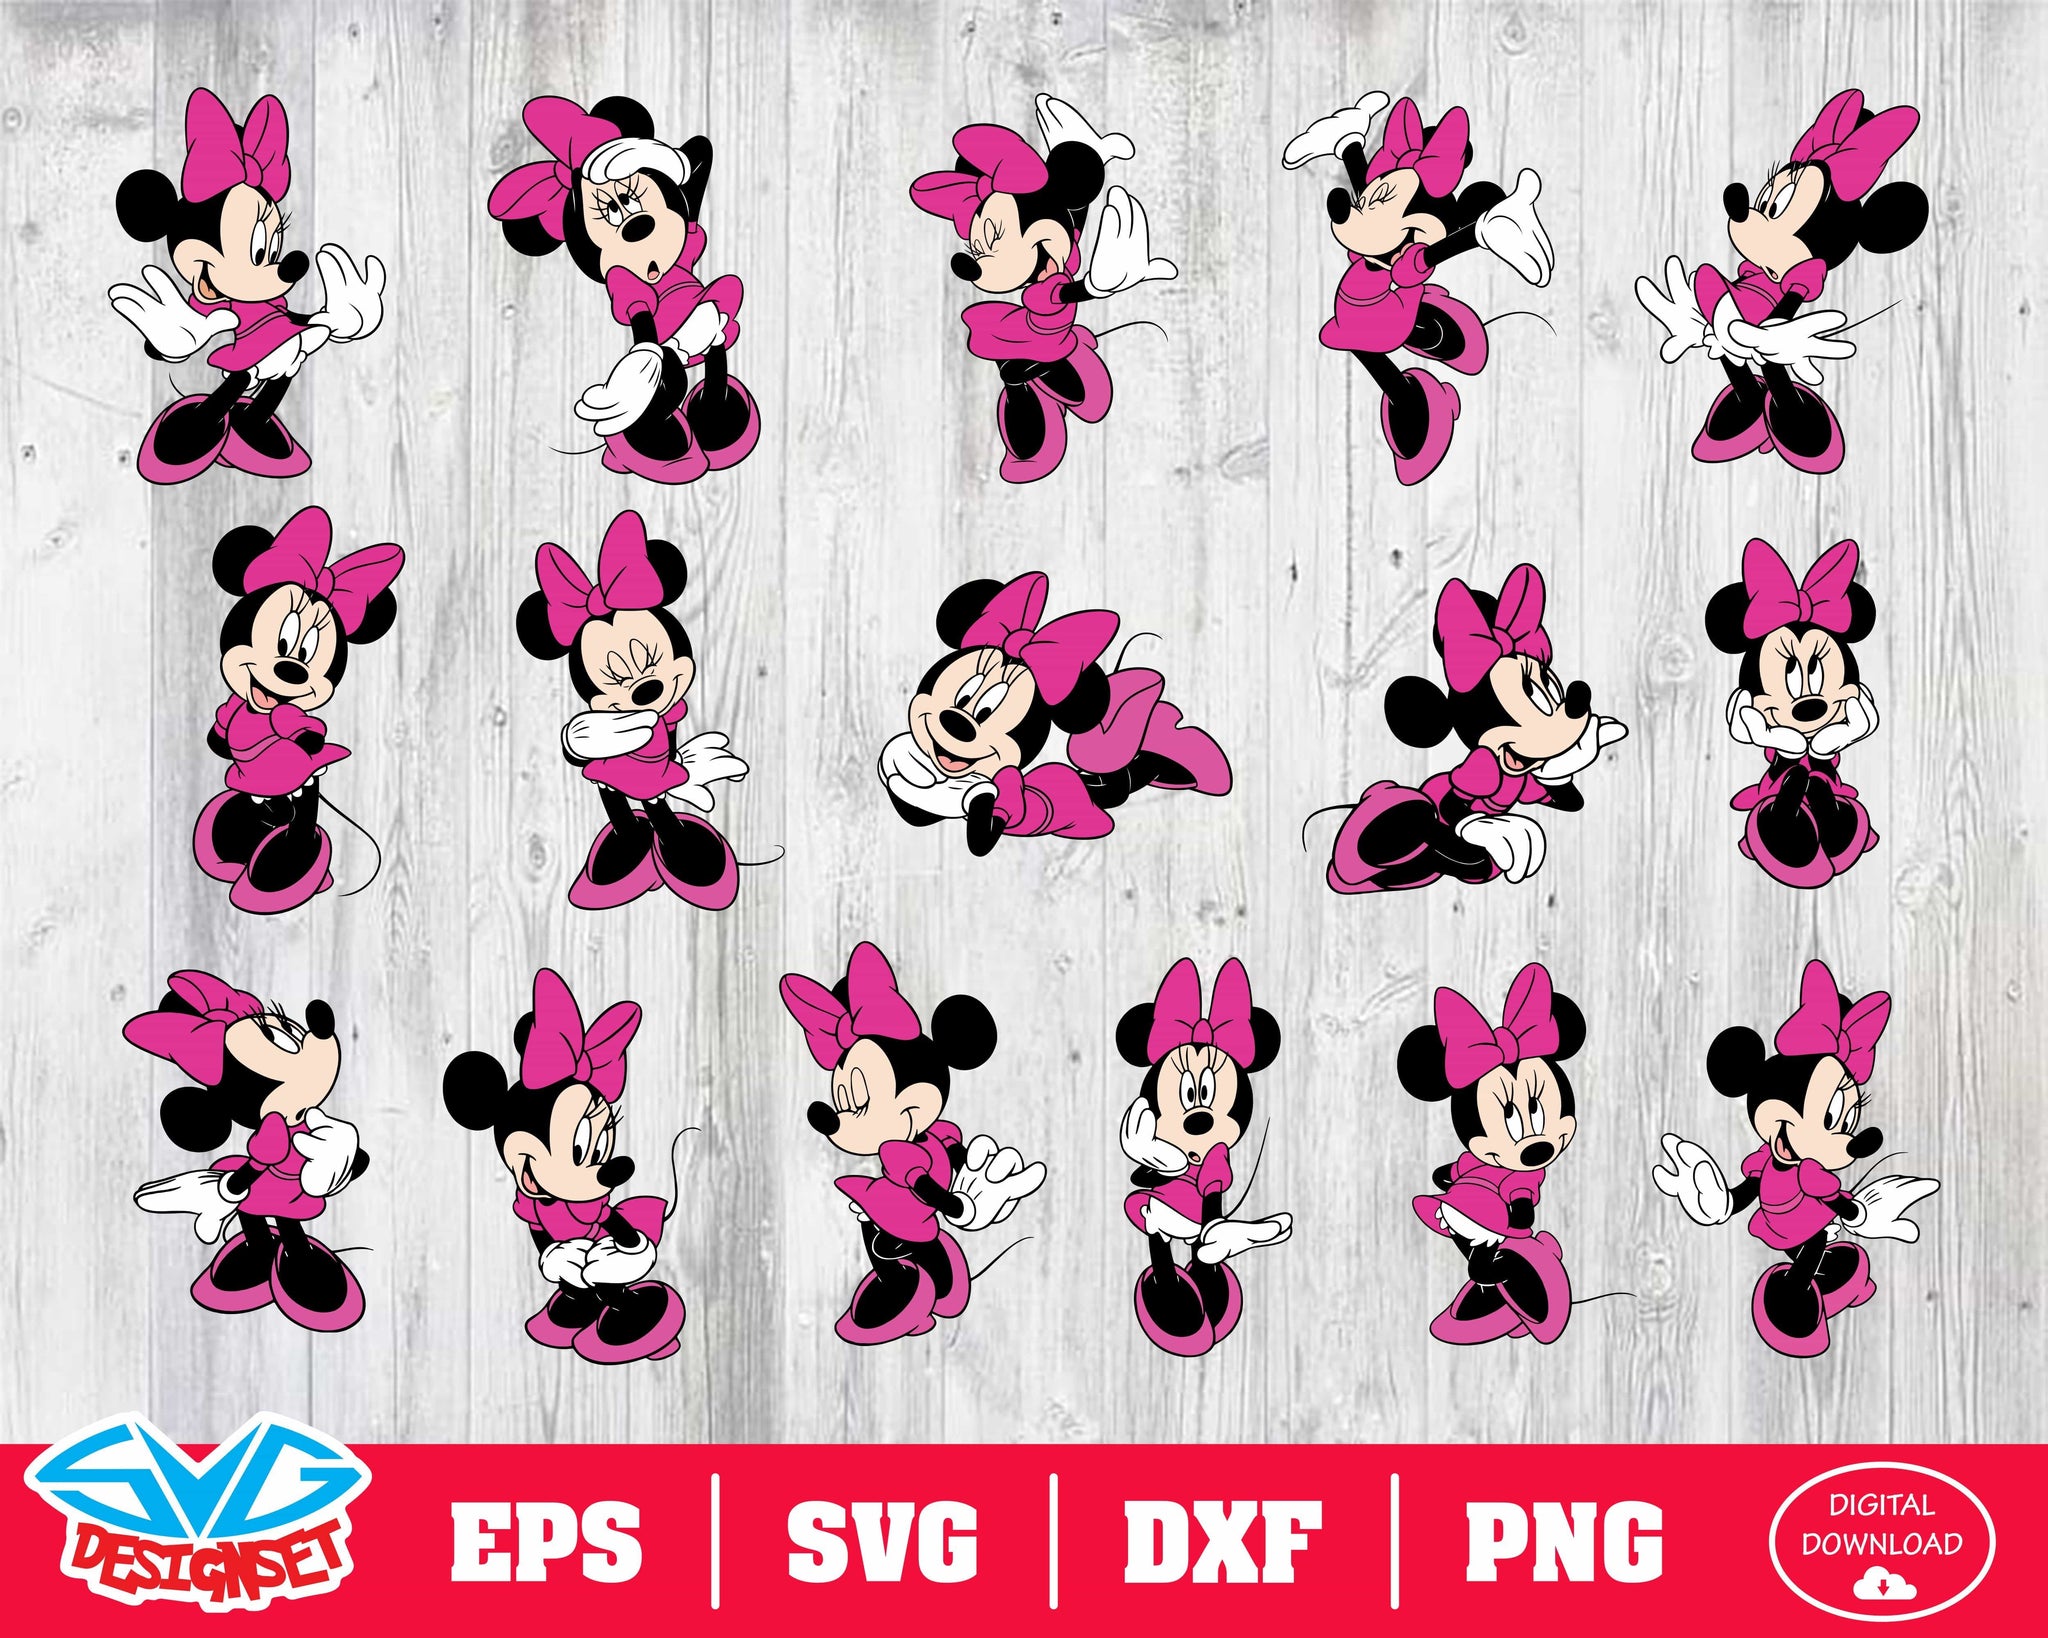 Minnie mouse Svg, Dxf, Eps, Png, Clipart, Silhouette and Cutfiles #1 - SVGDesignSets